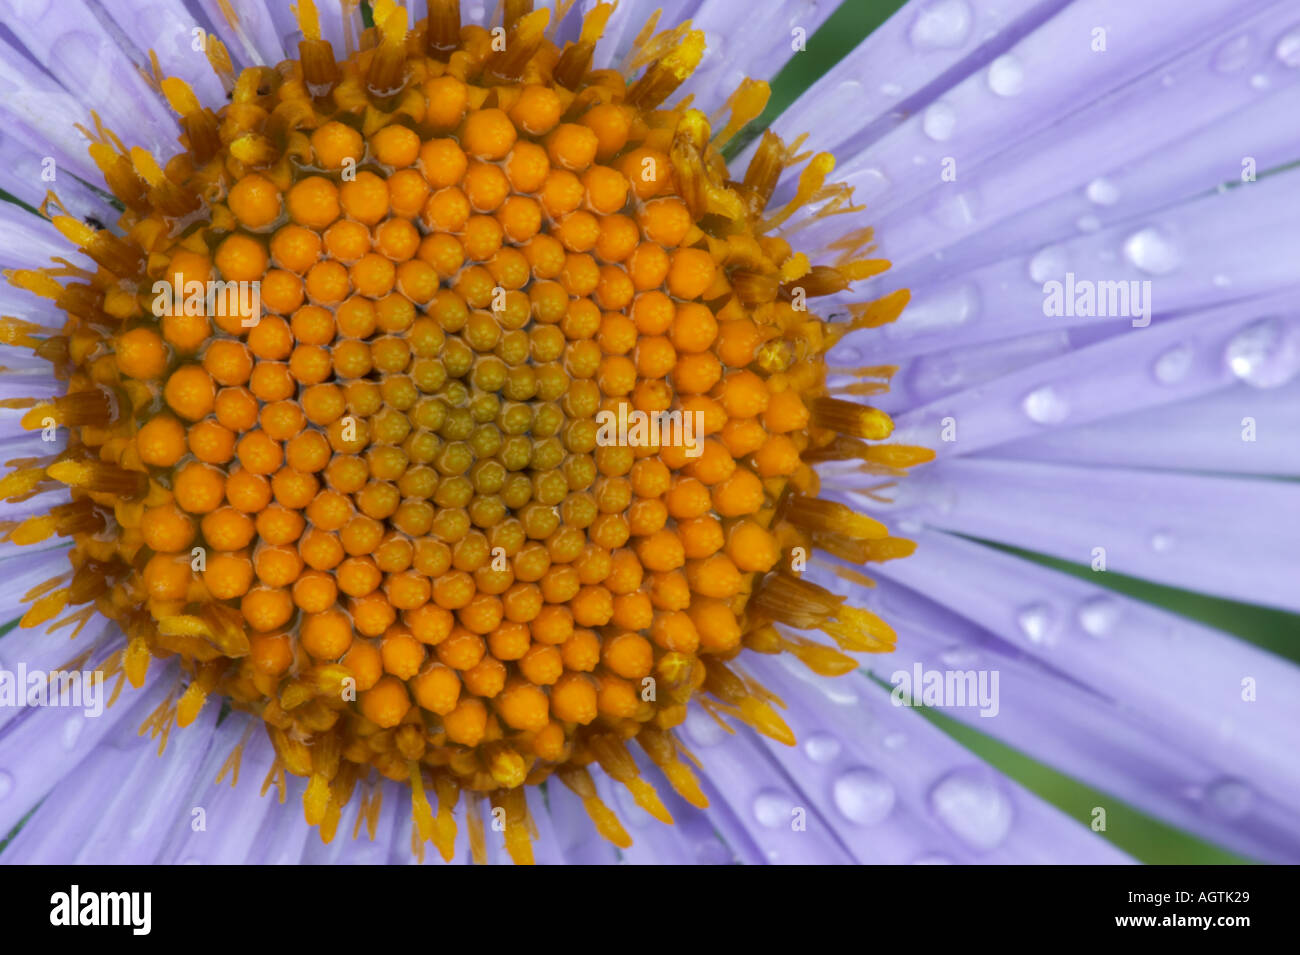 Macro shot of central part of a Callistephus (China aster, or annual aster) flower. Scientific name: Callistephus chinensis. Stock Photo